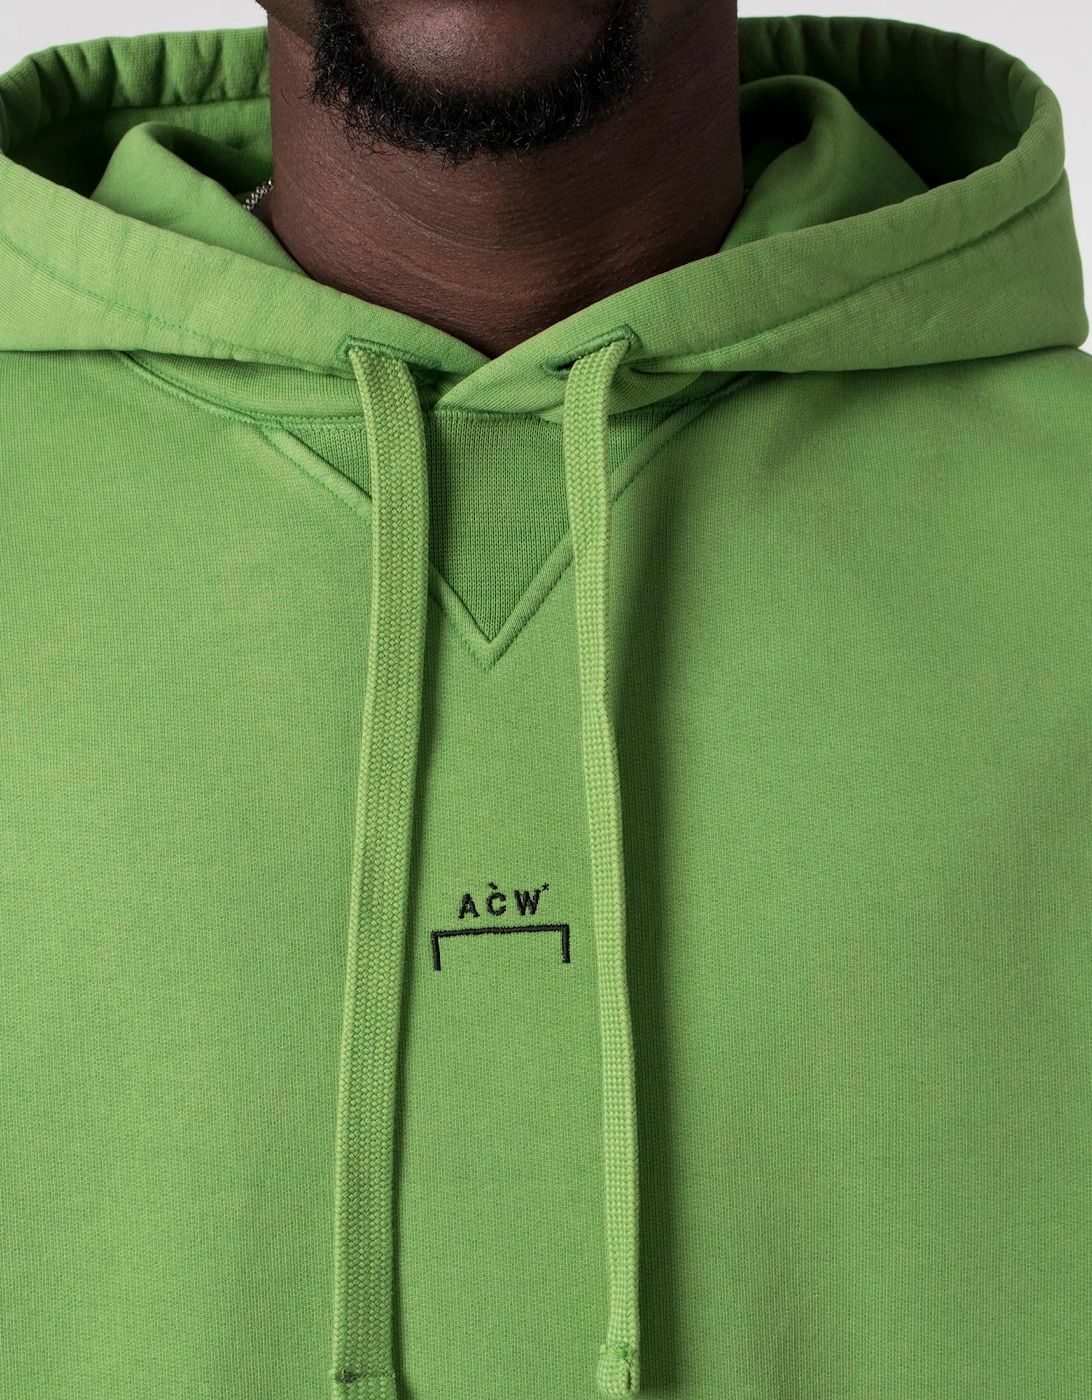 Relaxed Fit Essential Hoodie